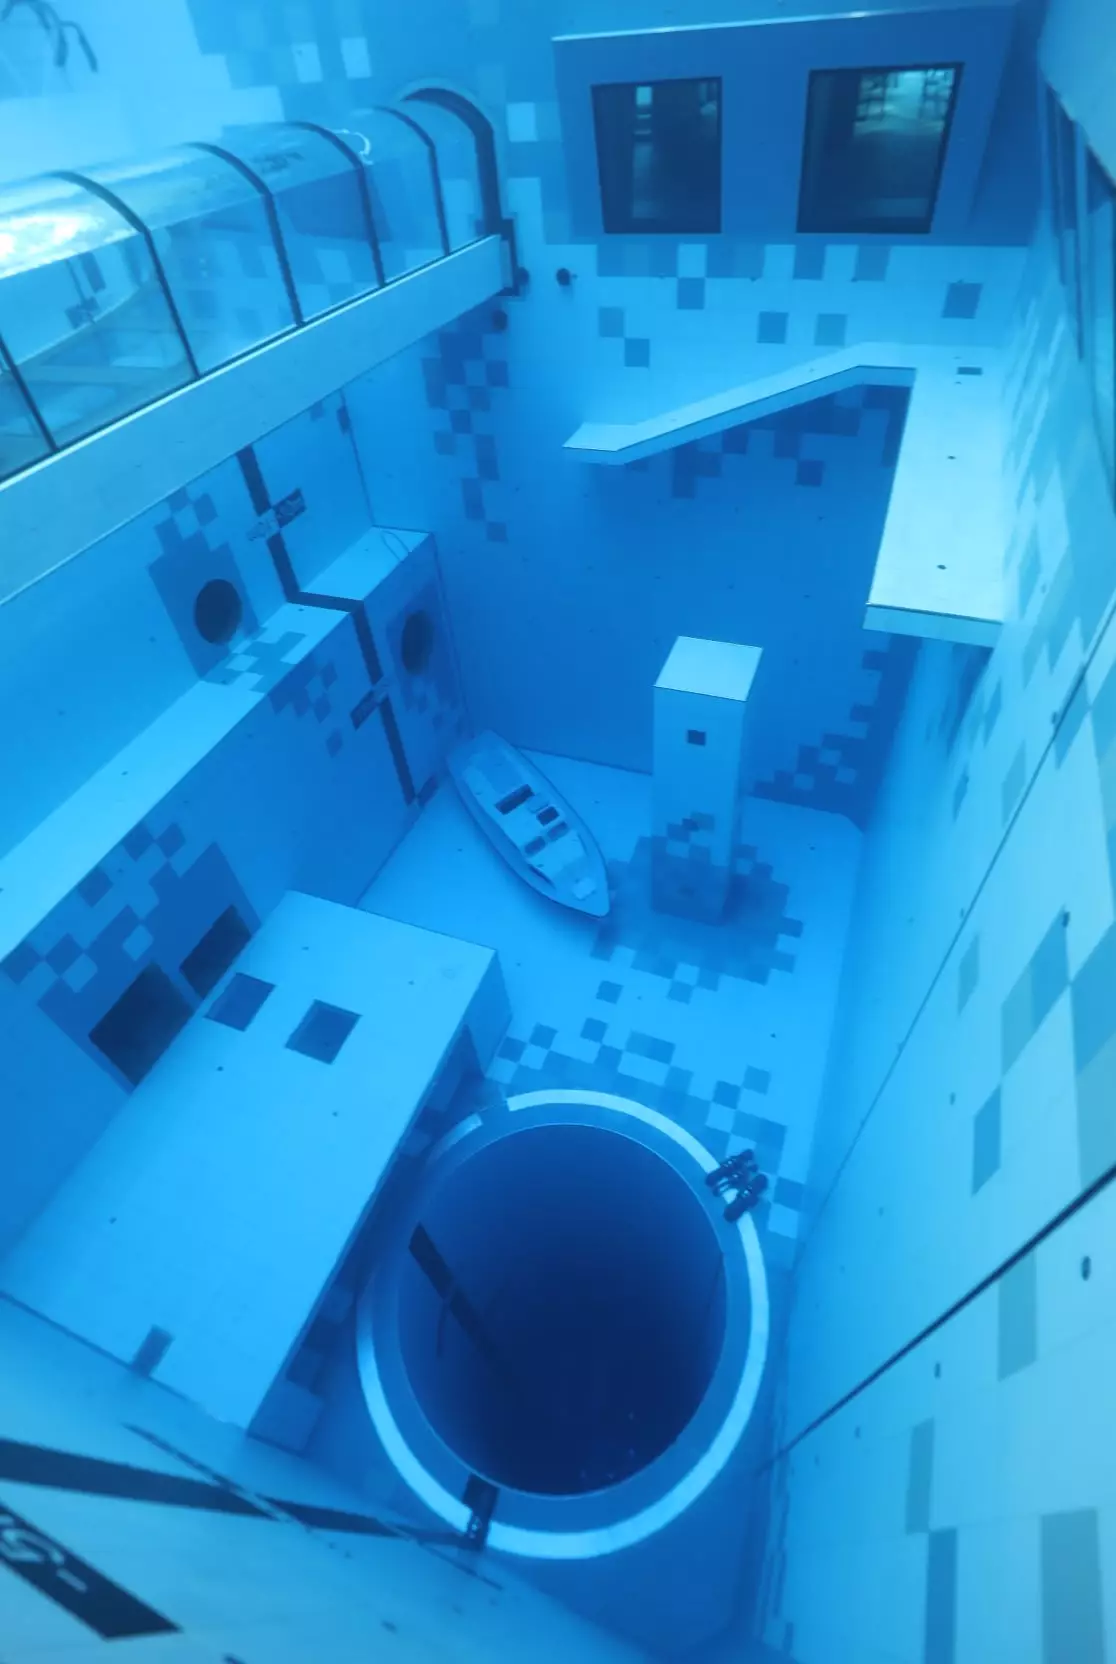 It boasts a number of underwater hotel rooms.